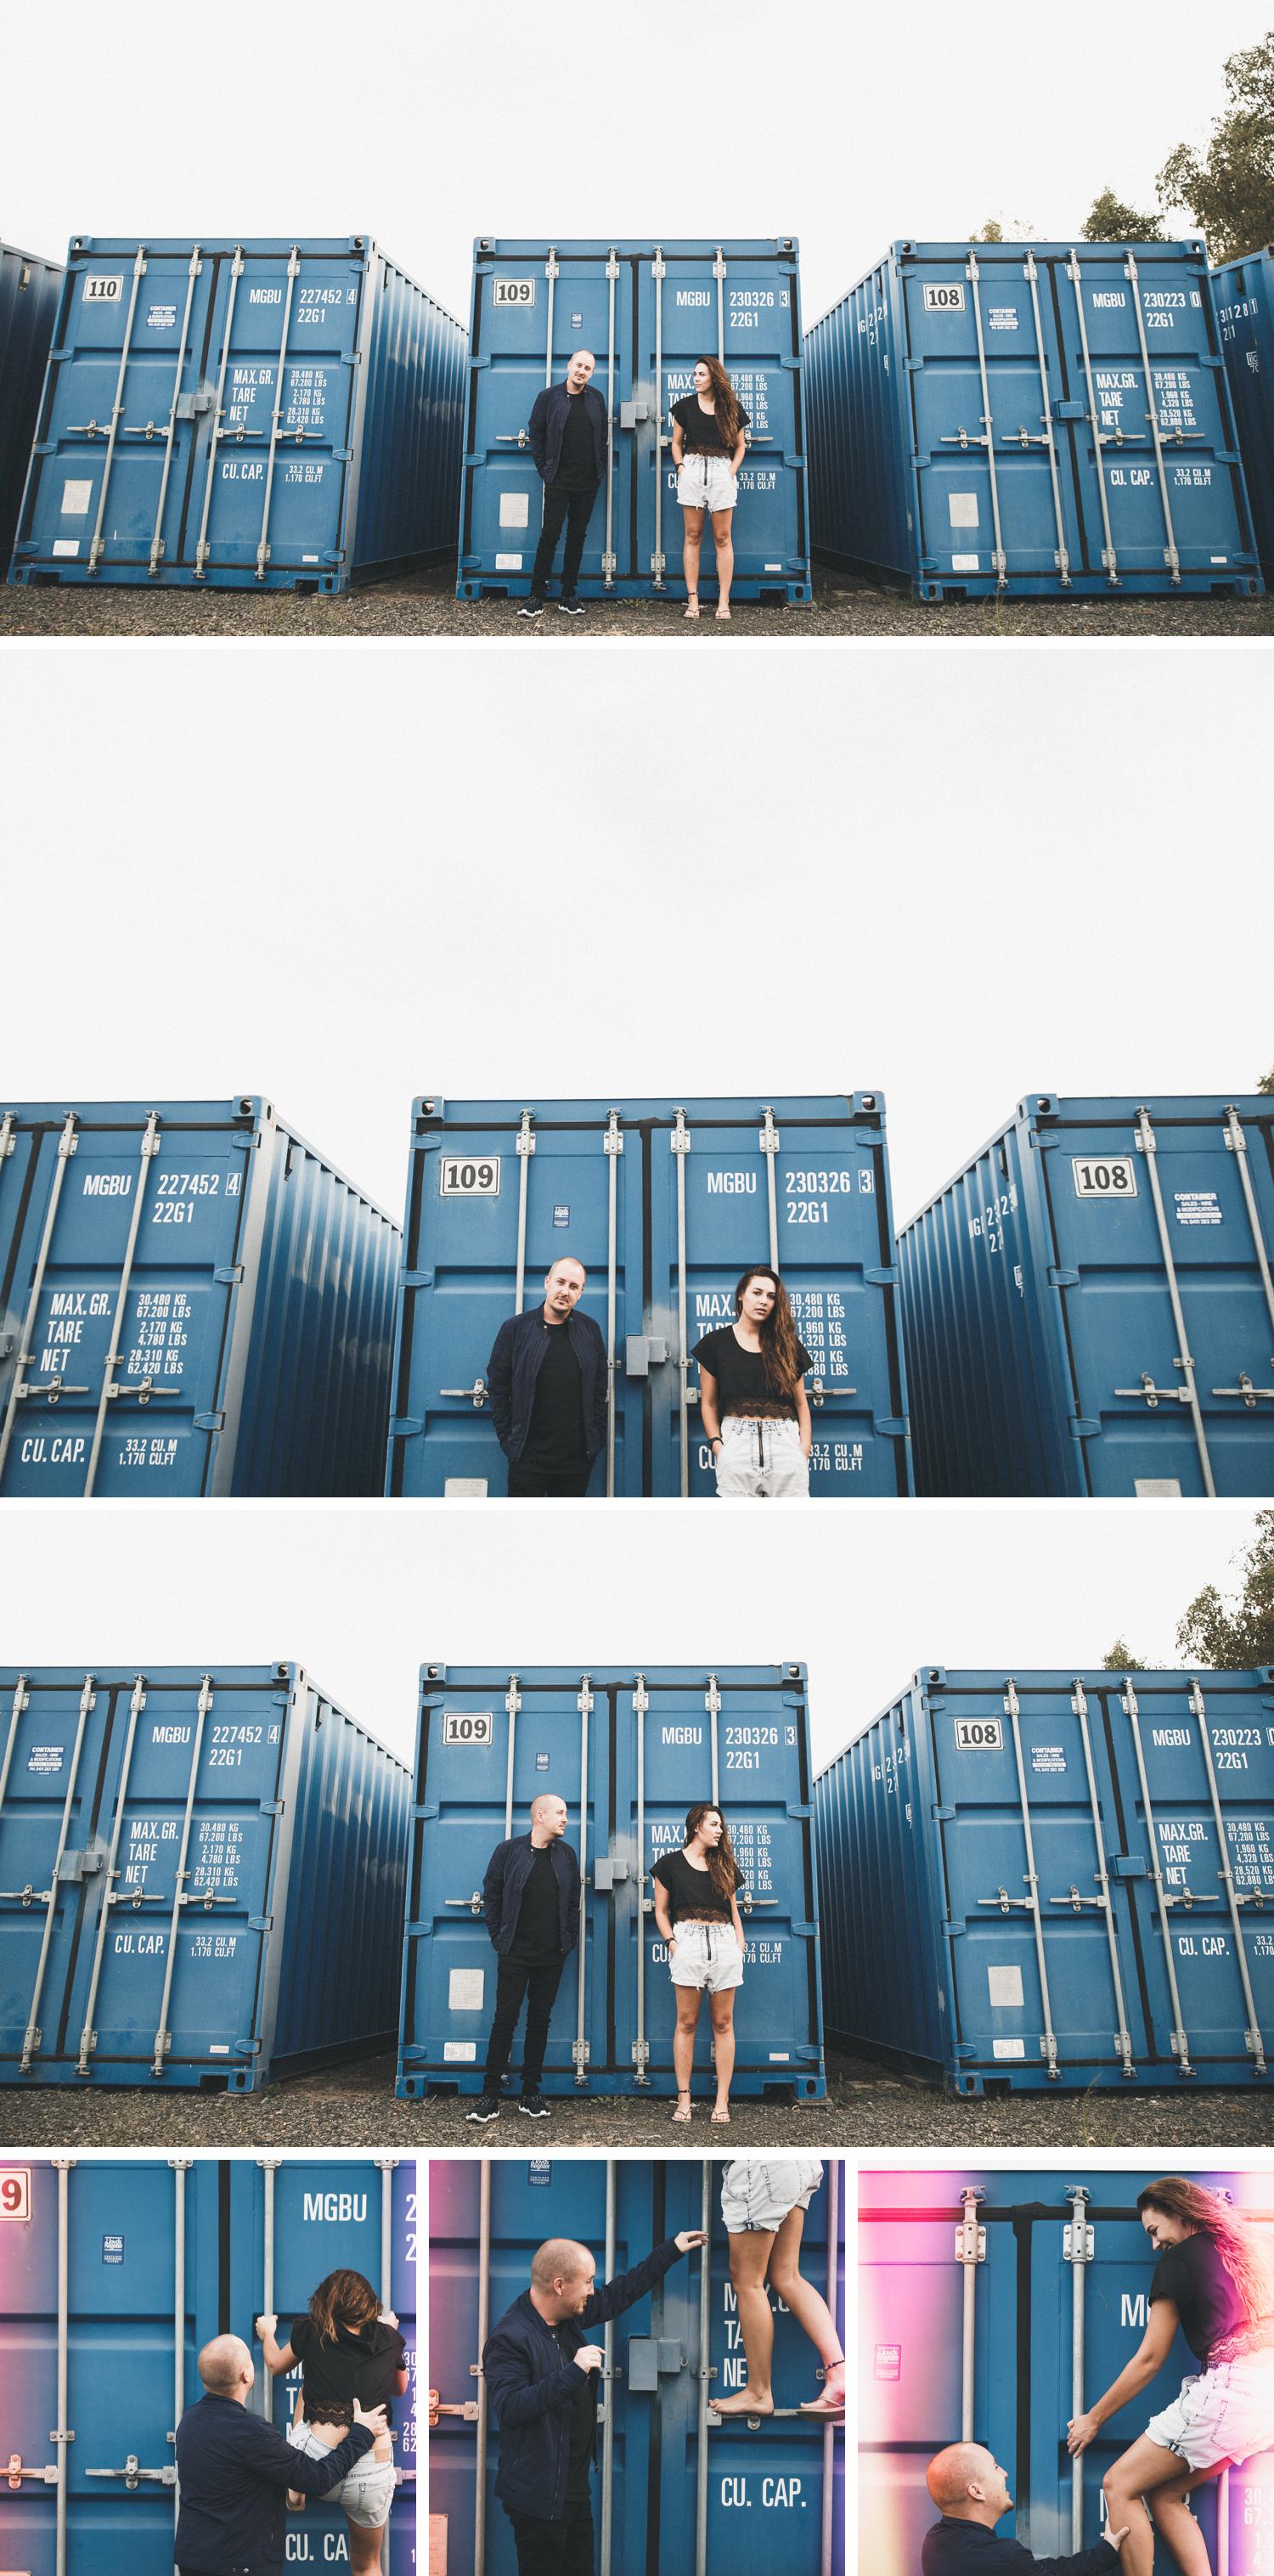 Shipping Containers Engagement Shoot, Gippsland Engagement Shoot, Cute Couple Photos by Danae Studios, Couple Embracing